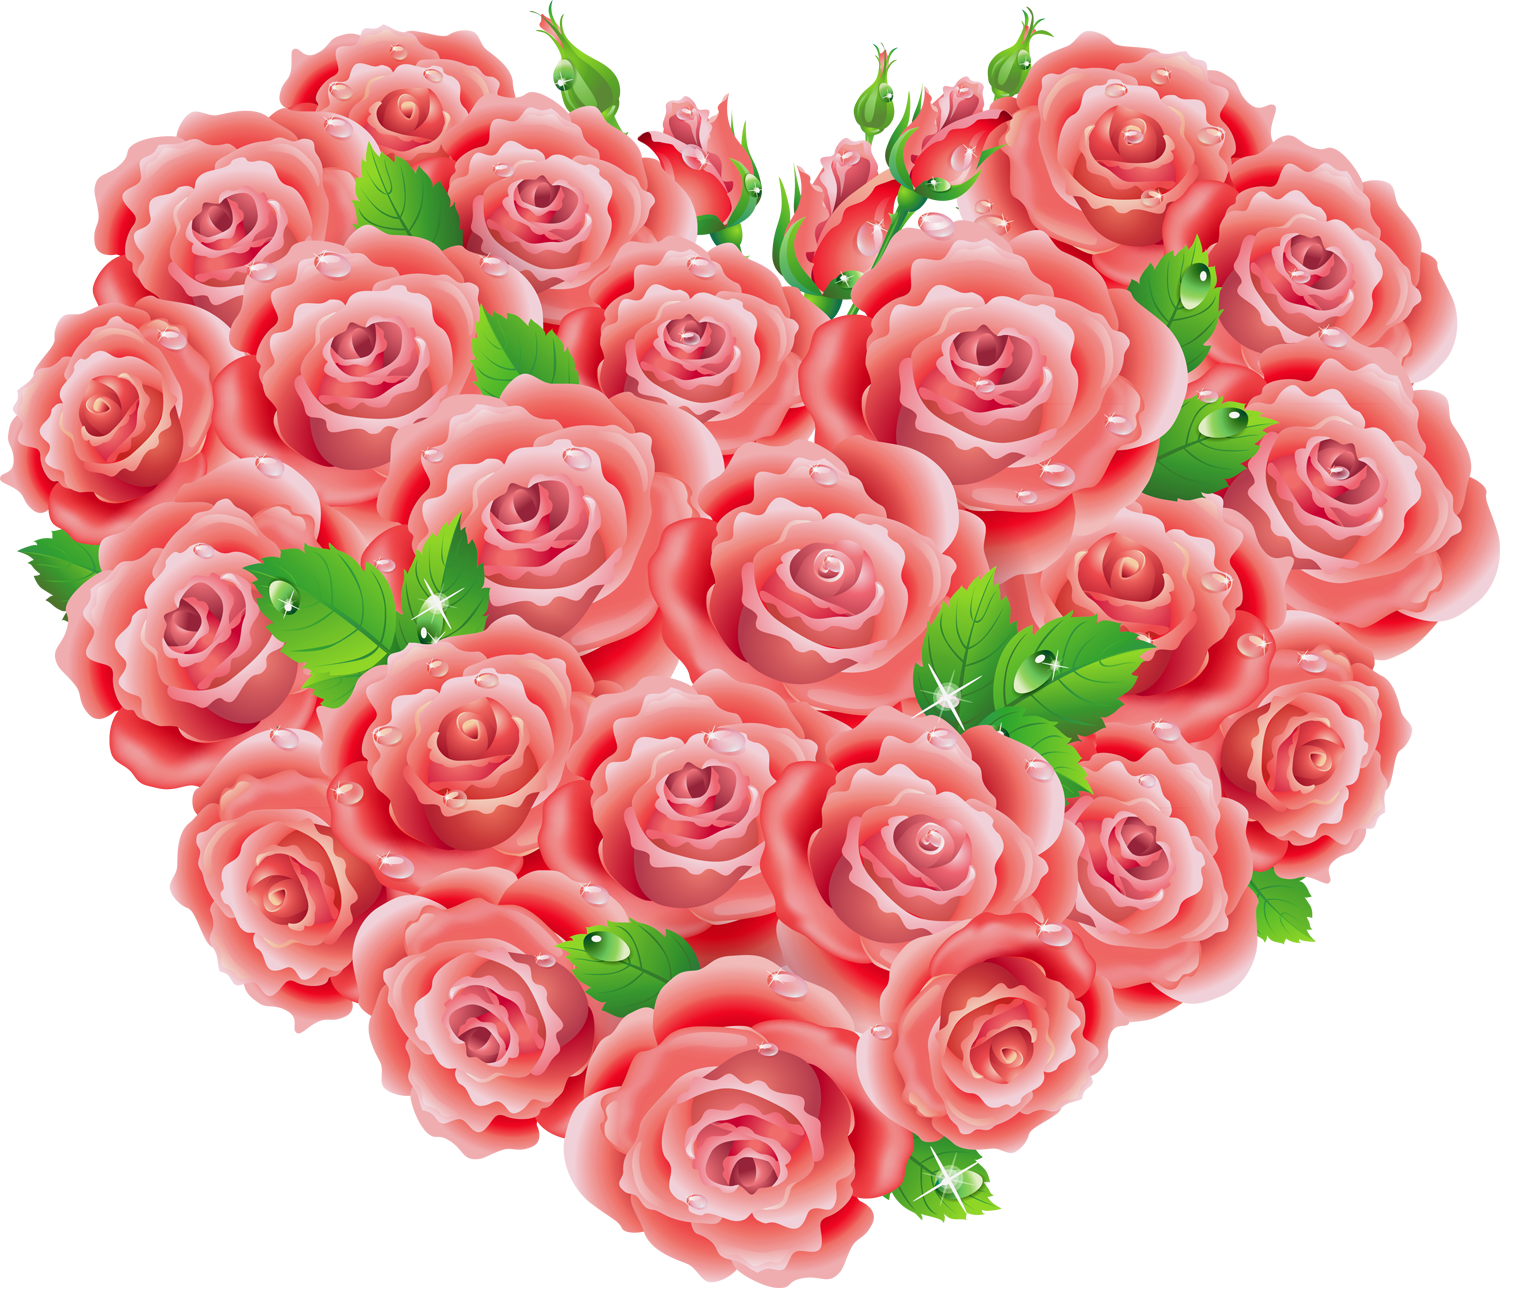 clipart of roses and hearts - photo #11